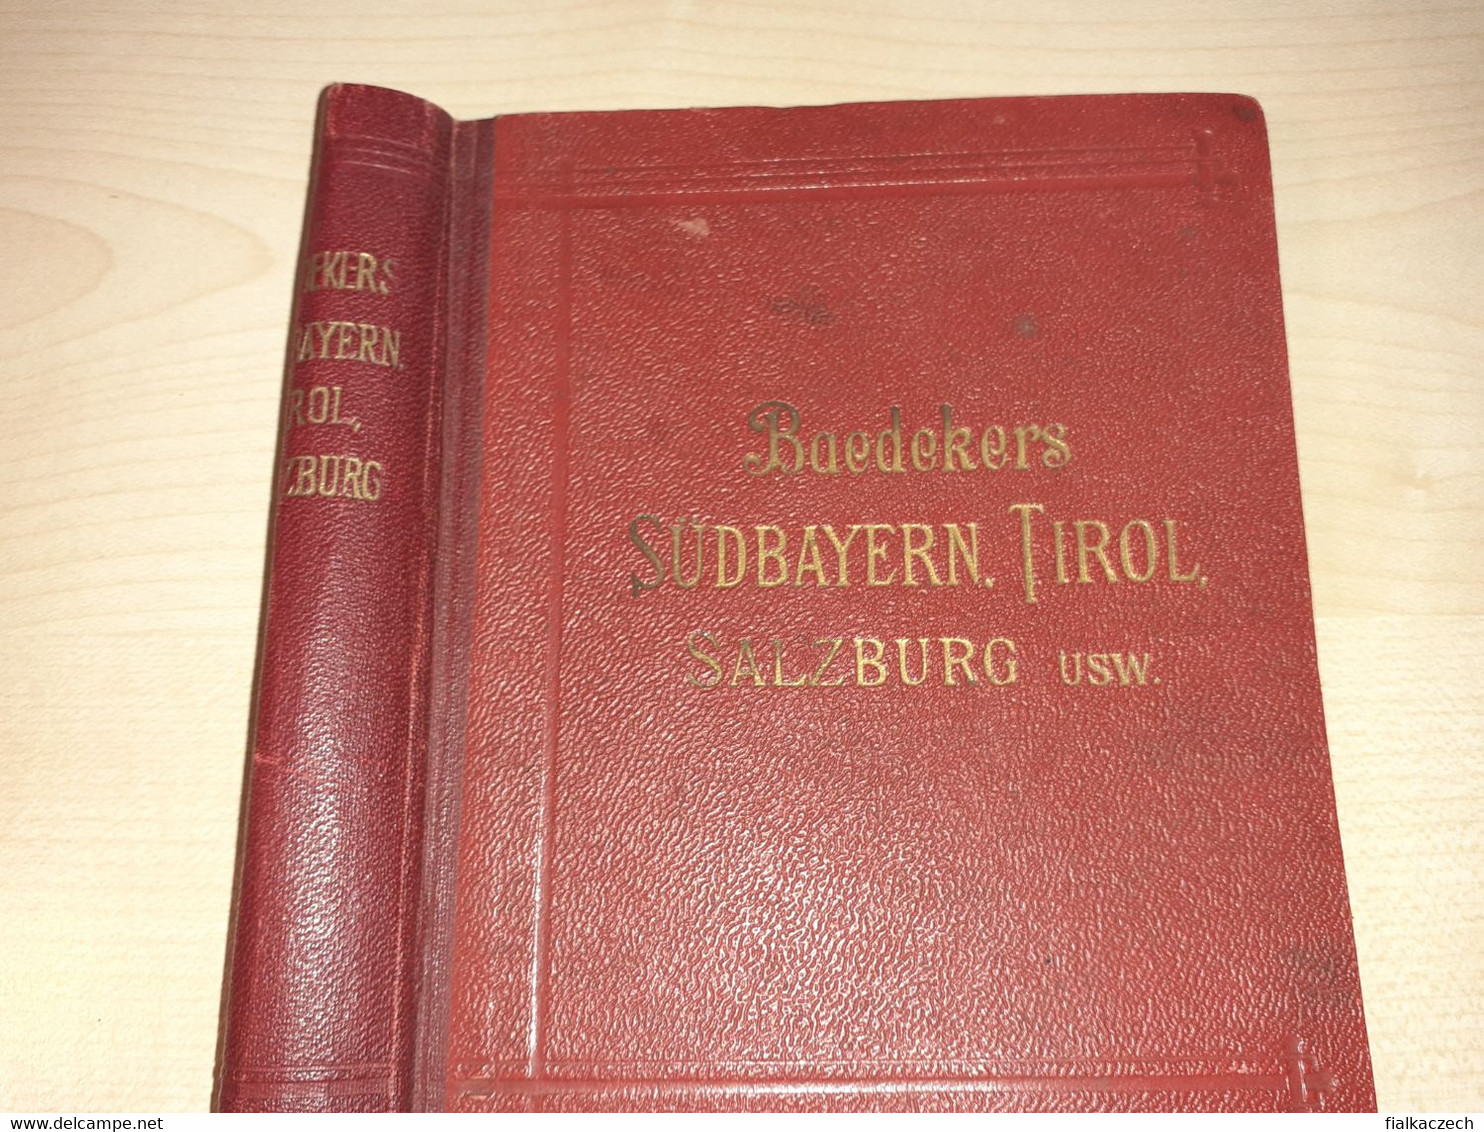 Baedekers, Südbayern Tirol Salzburg Tour Guide, 1914, Germany, Austria + Another Südtirol Tour Guide - Unclassified